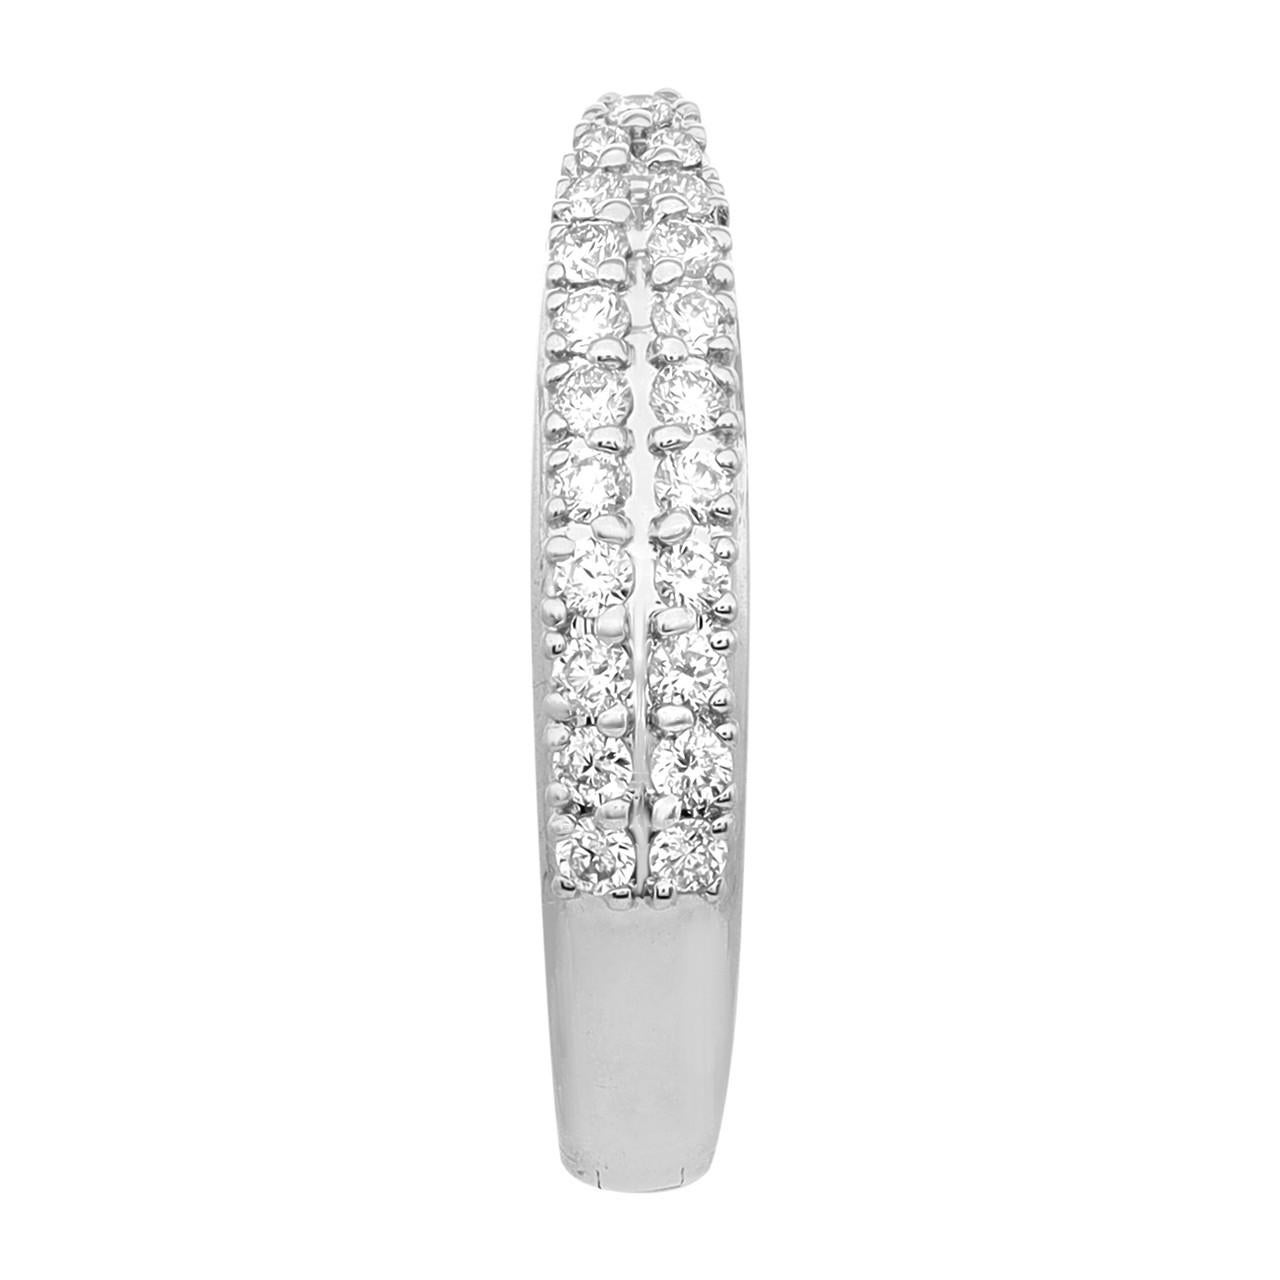 Introducing our 0.39 Carat Double Row Diamond Huggie Earrings in pristine 18K White Gold. These earrings boast a double row of sparkling diamonds, totaling 0.39 carats, set in a lustrous white gold setting for a classic and elegant